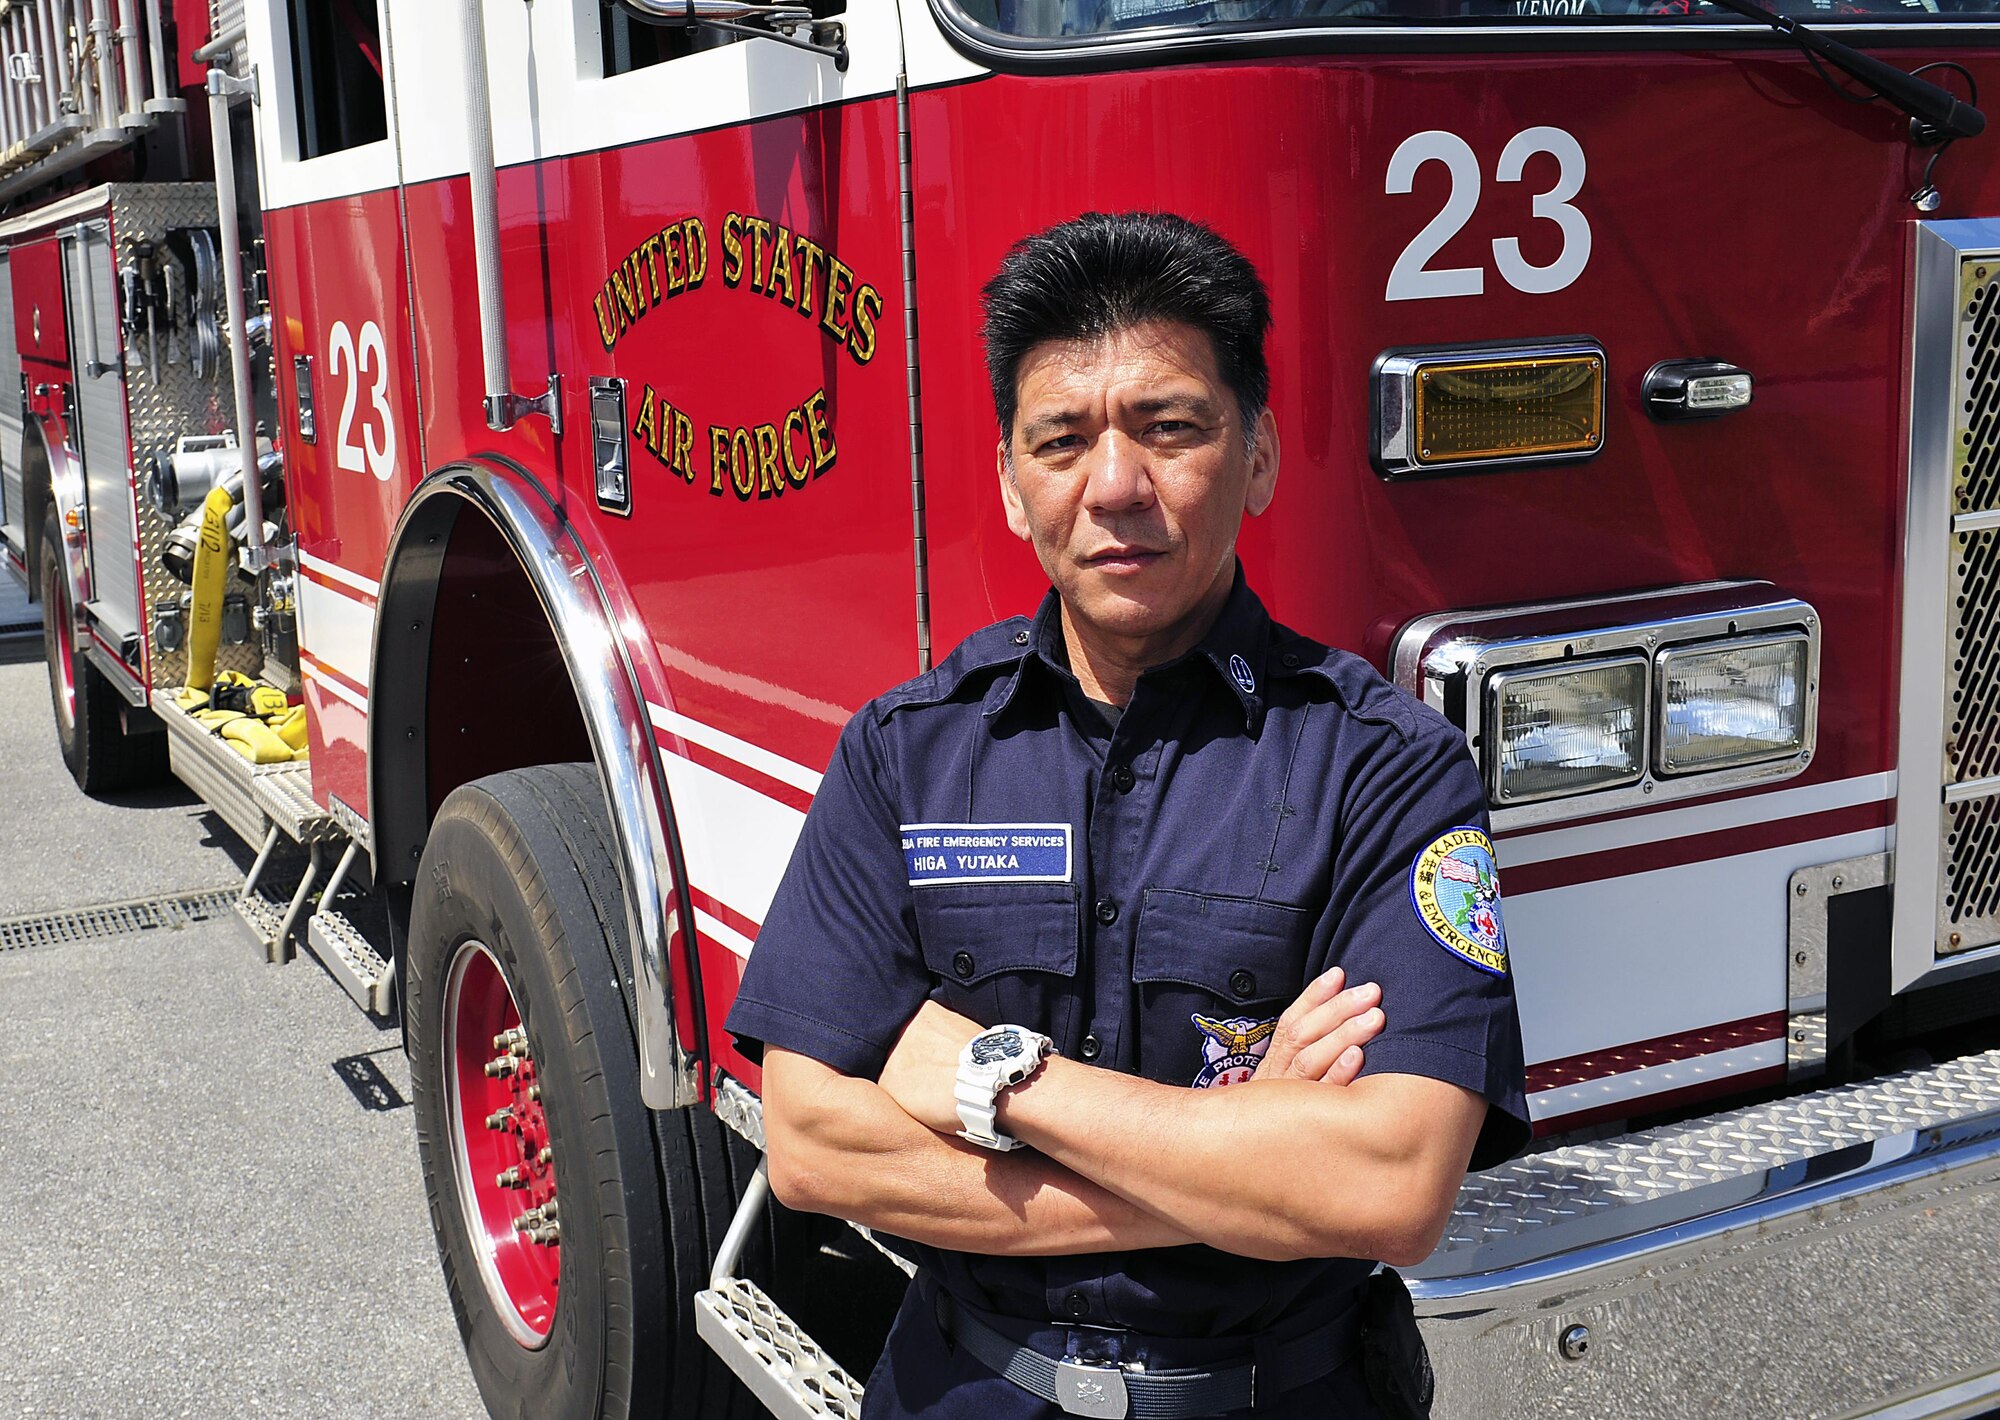 Yutaka Higa, a 18th Civil Engineer Squadron firefighter, poses for a photo in front of a fire truck on Kadena Air Base, Japan, April 2, 2015. Higa, who has been working at the fire department for more than 24 years, recently won the 2014 Air Force Firefighter of the Year award, civilian category, for his day-to-day accomplishments. (U.S. Air Force photo/Naoto Anazawa)